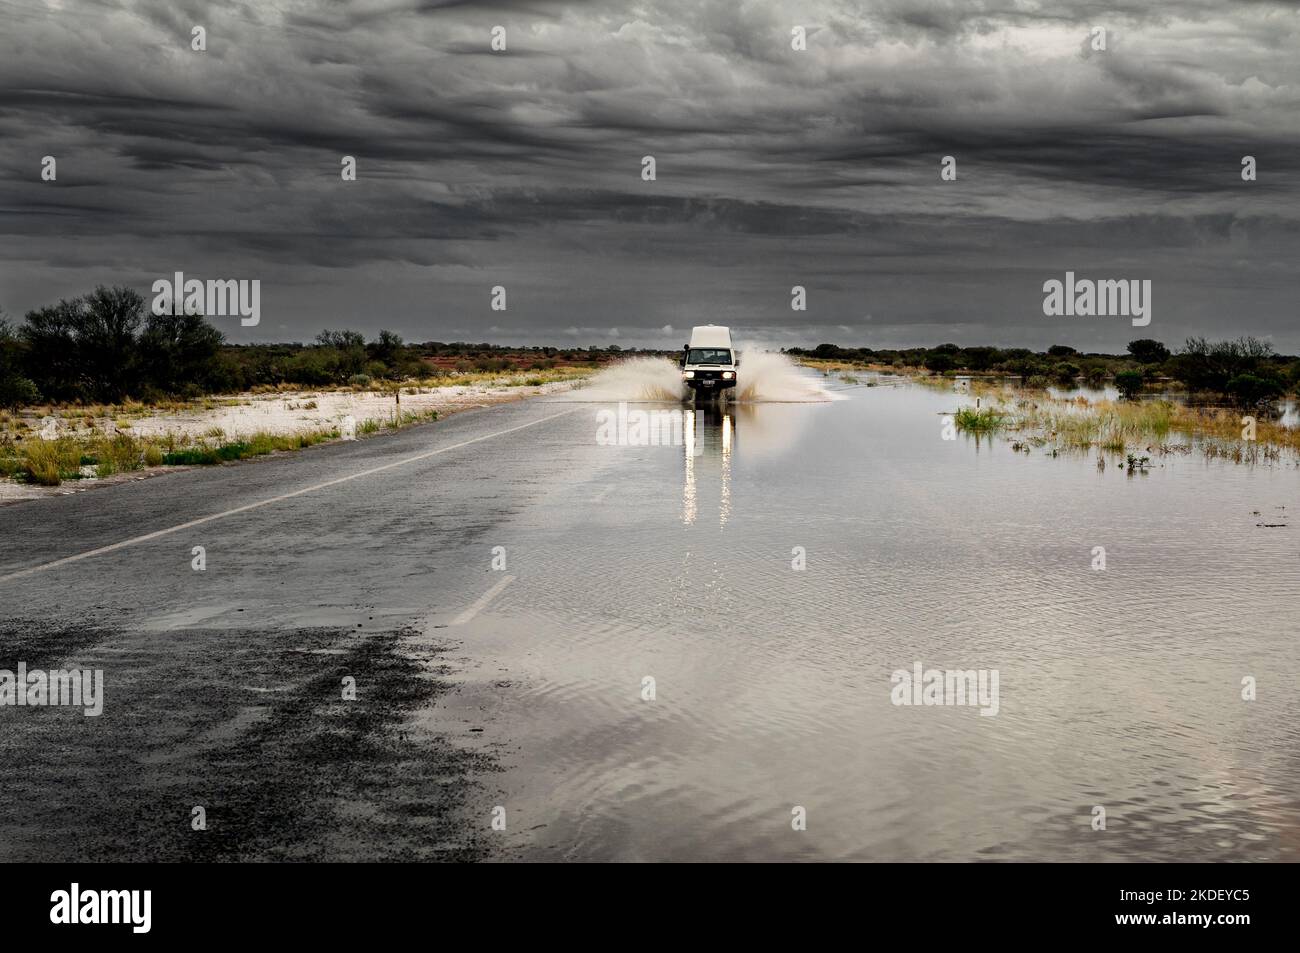 Car driving on a flooded road in Australia's Outback. Stock Photo